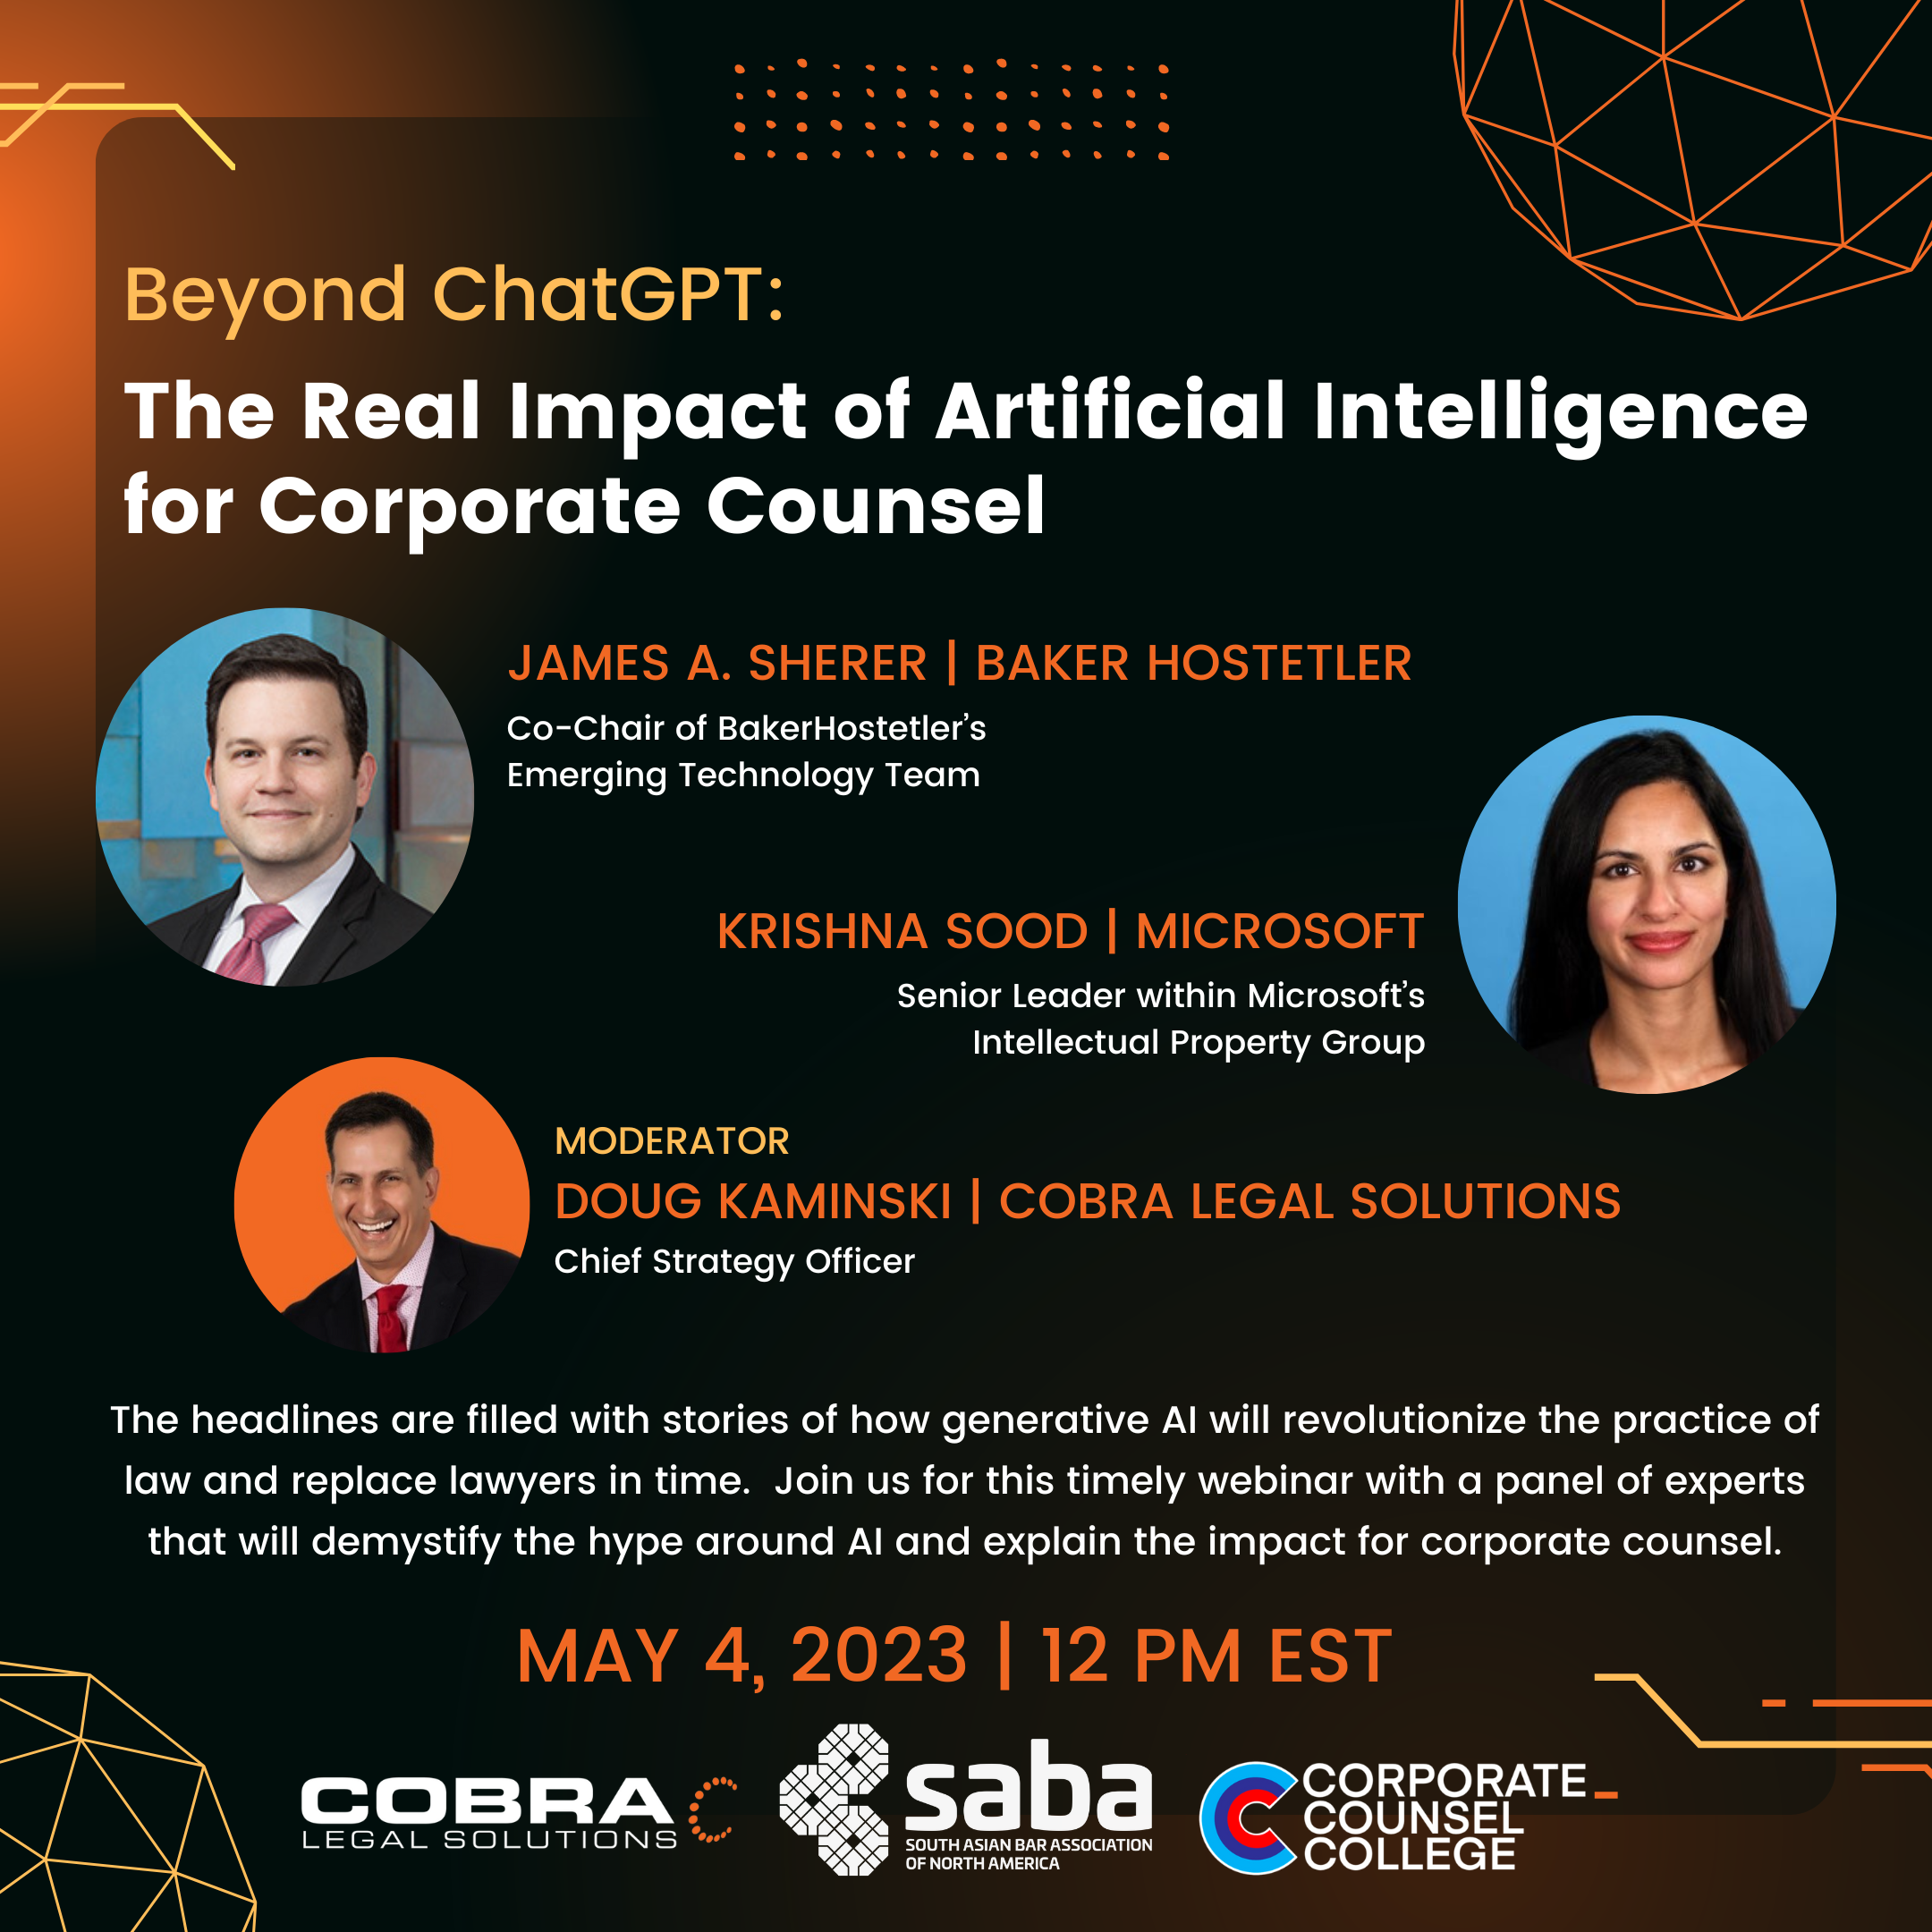 Beyond ChatGPT The Real Impact of Artificial Intelligence for Corporate Counsel